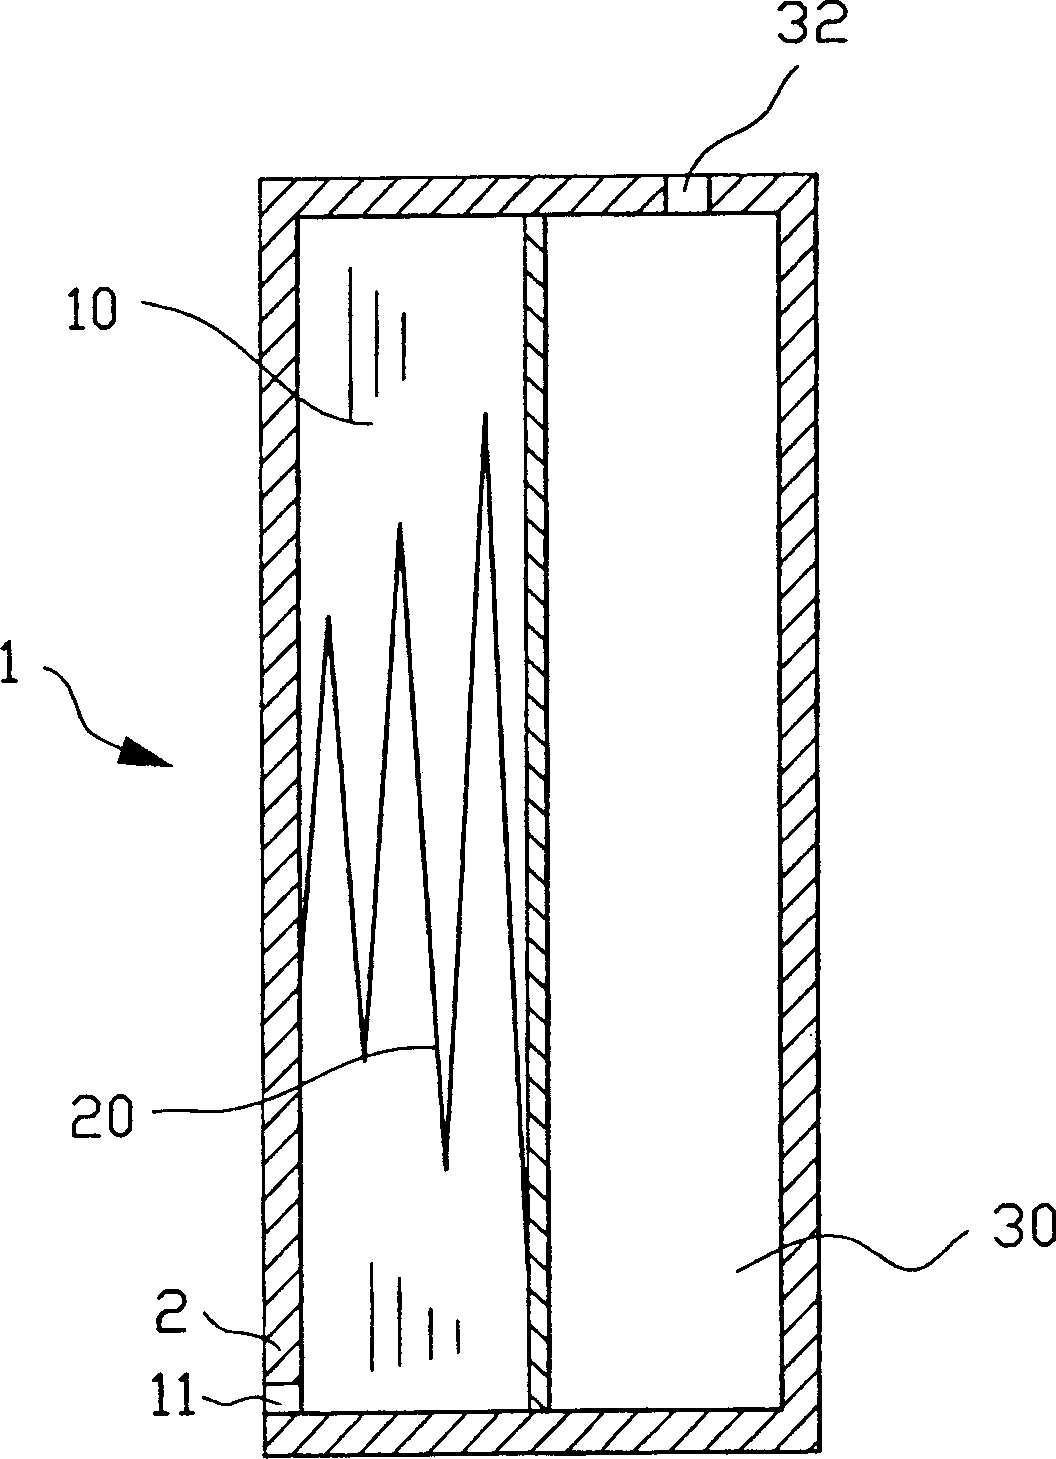 Suction pressure structure of cone-shaped spring in ink box